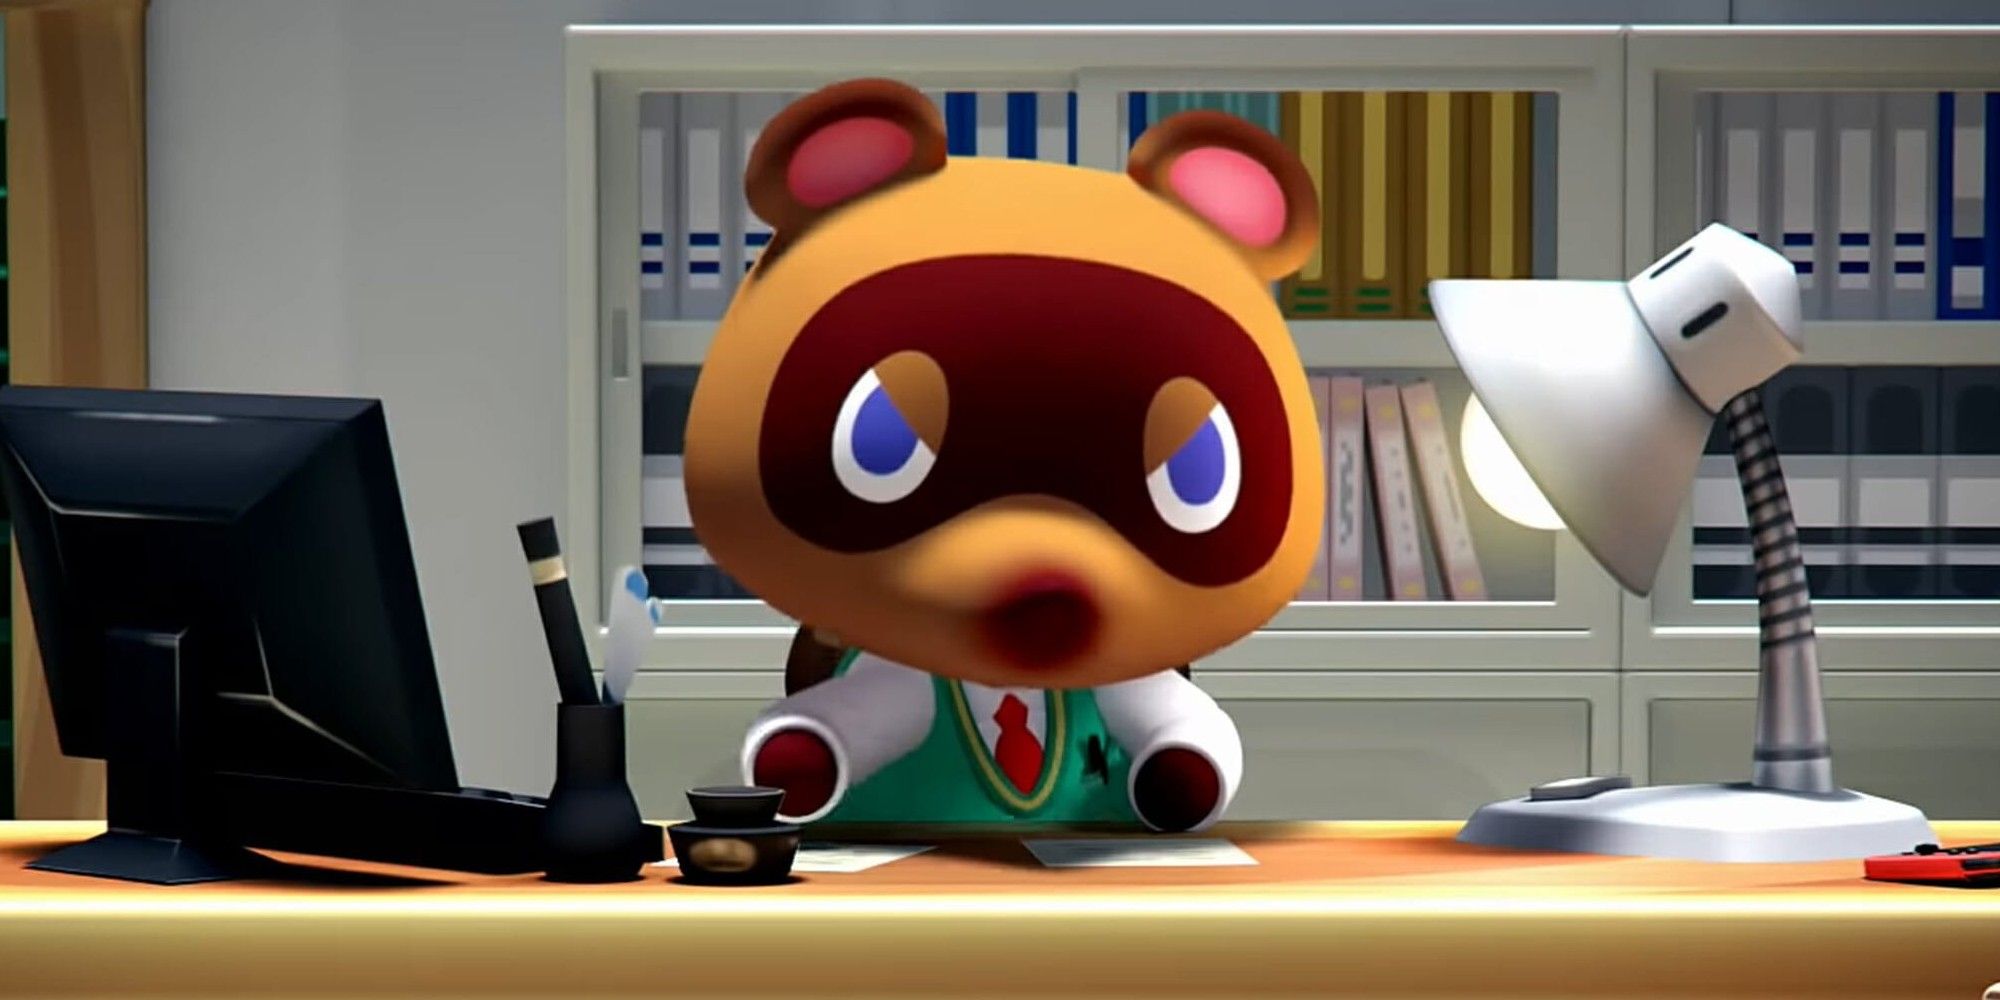 ACNH’s Tom Nook Gets Shot With Nerf Gun In Hilarious Viral Video